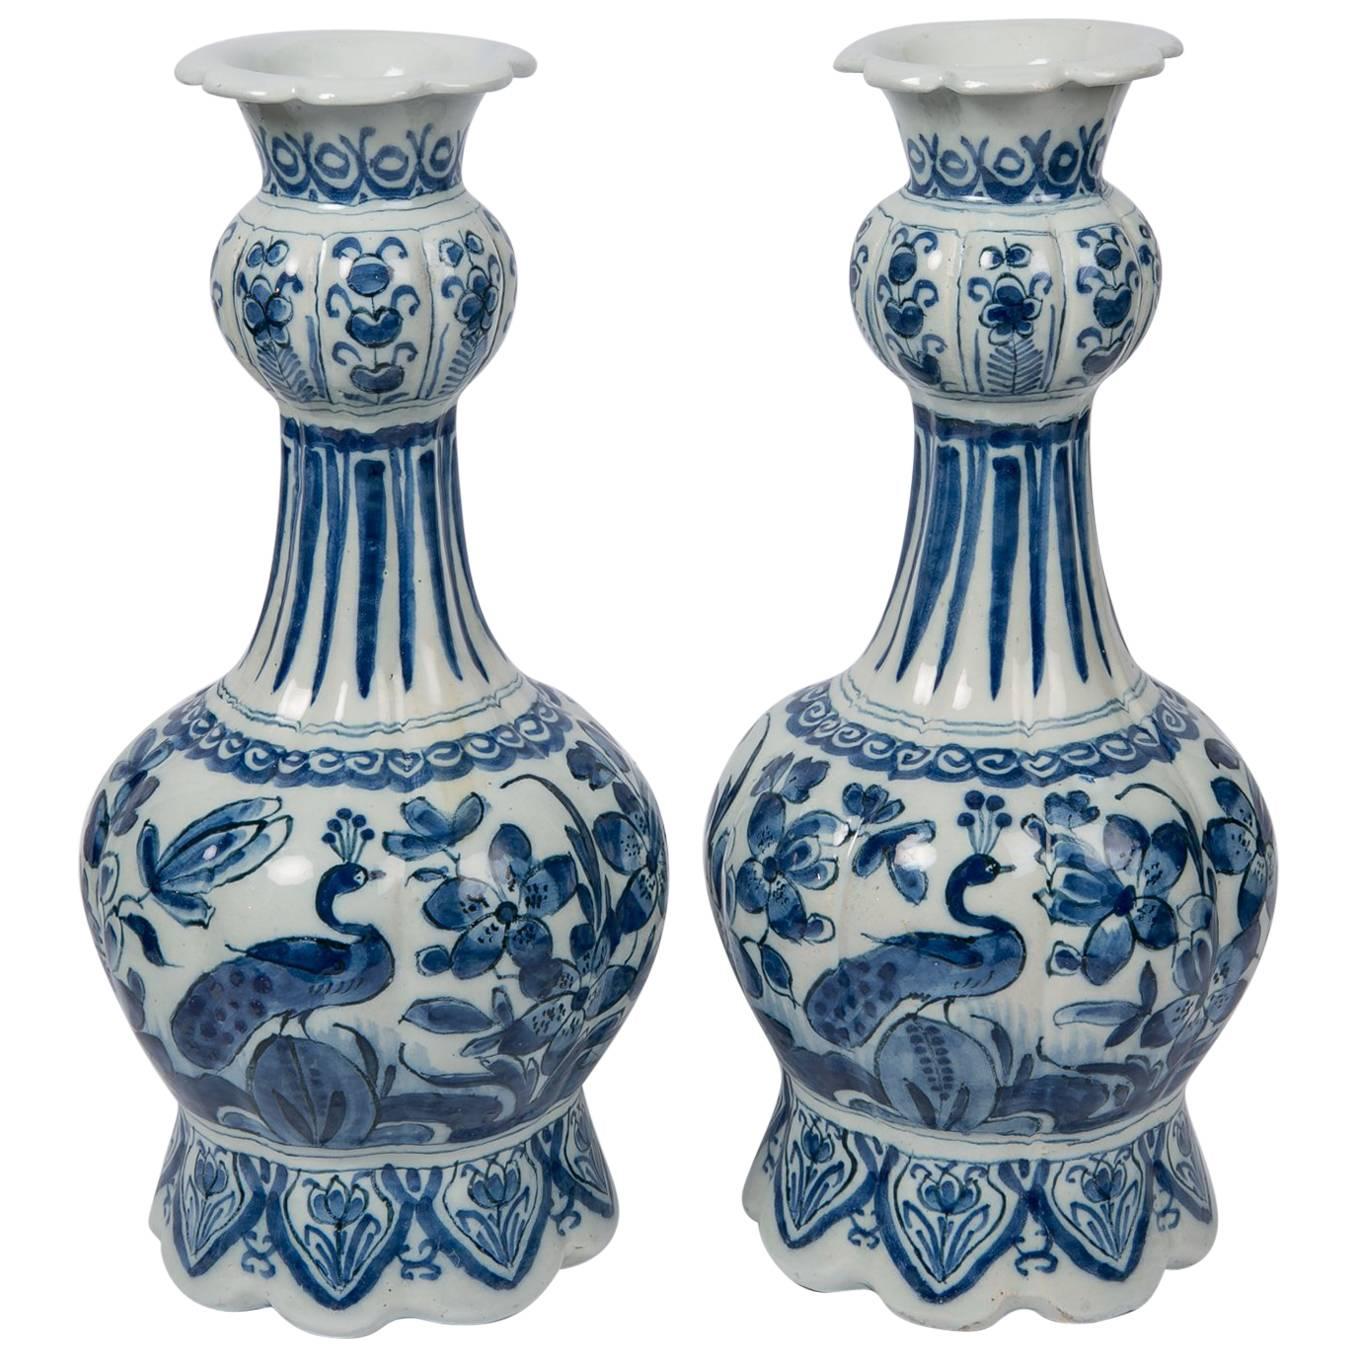 Pair Blue and White Dutch Delft Vases Showing Peacocks